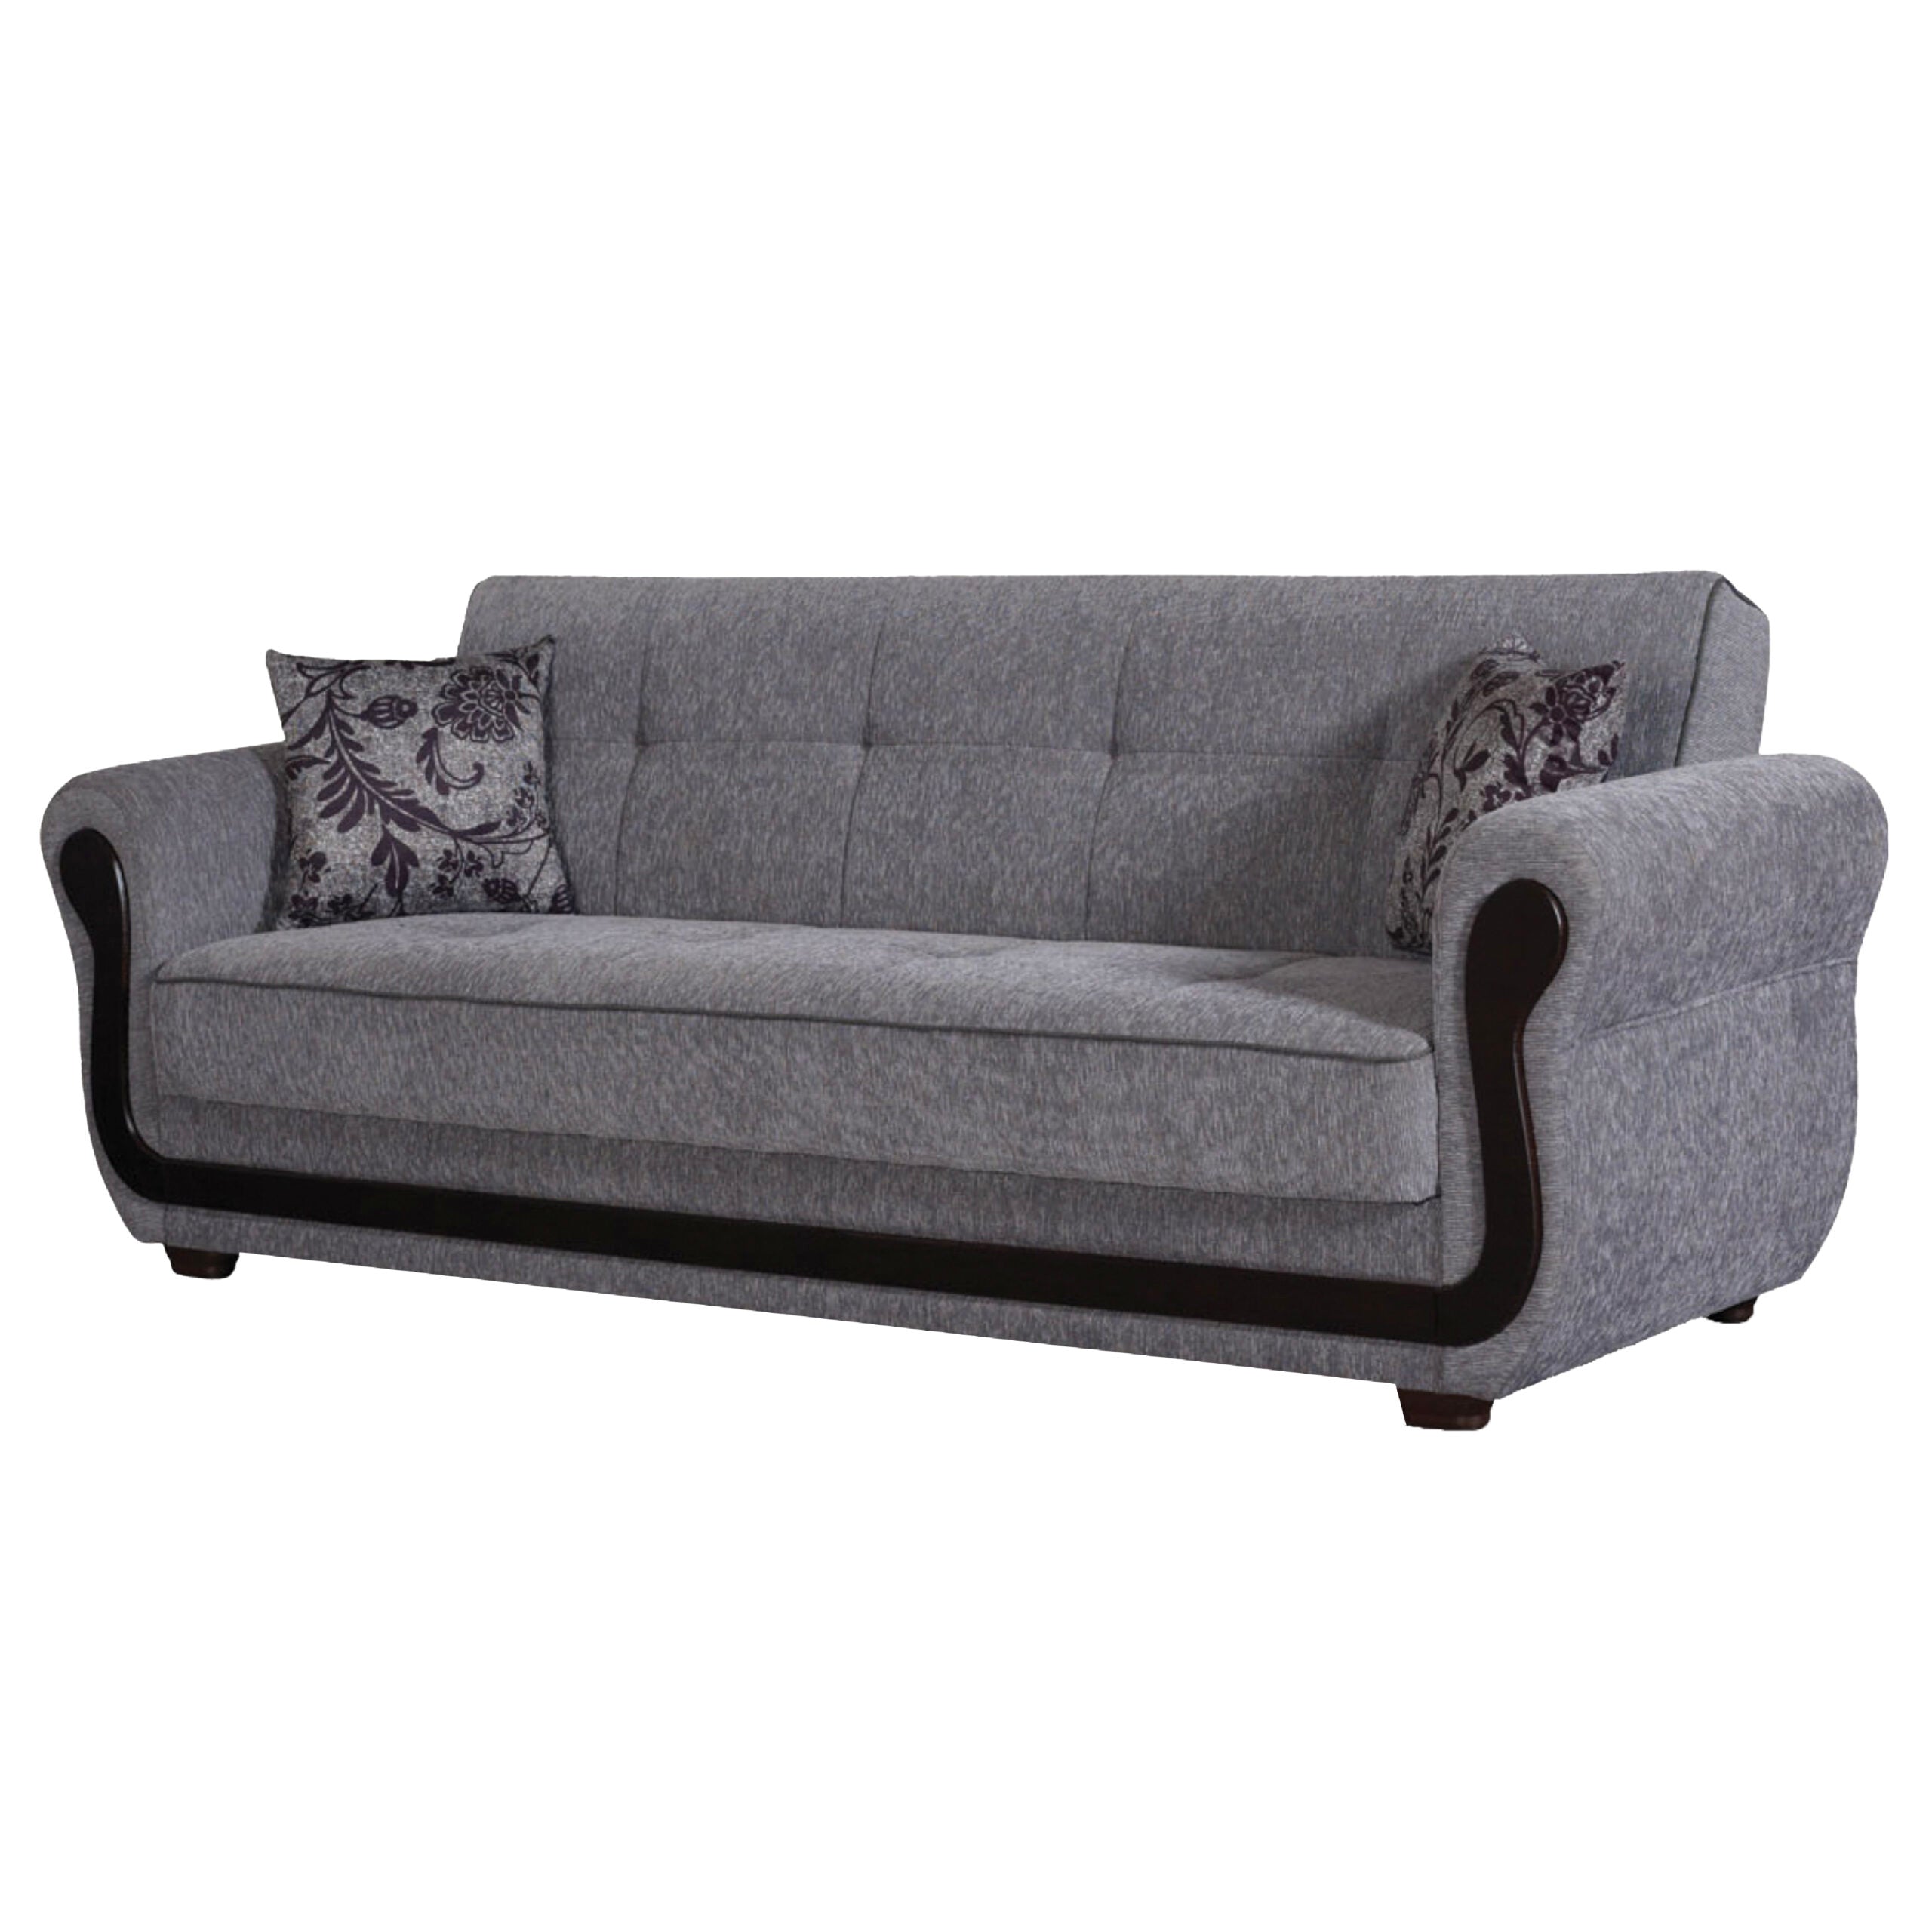 Surf Ave Set (Sofa & Loveseat) - Home Store Furniture